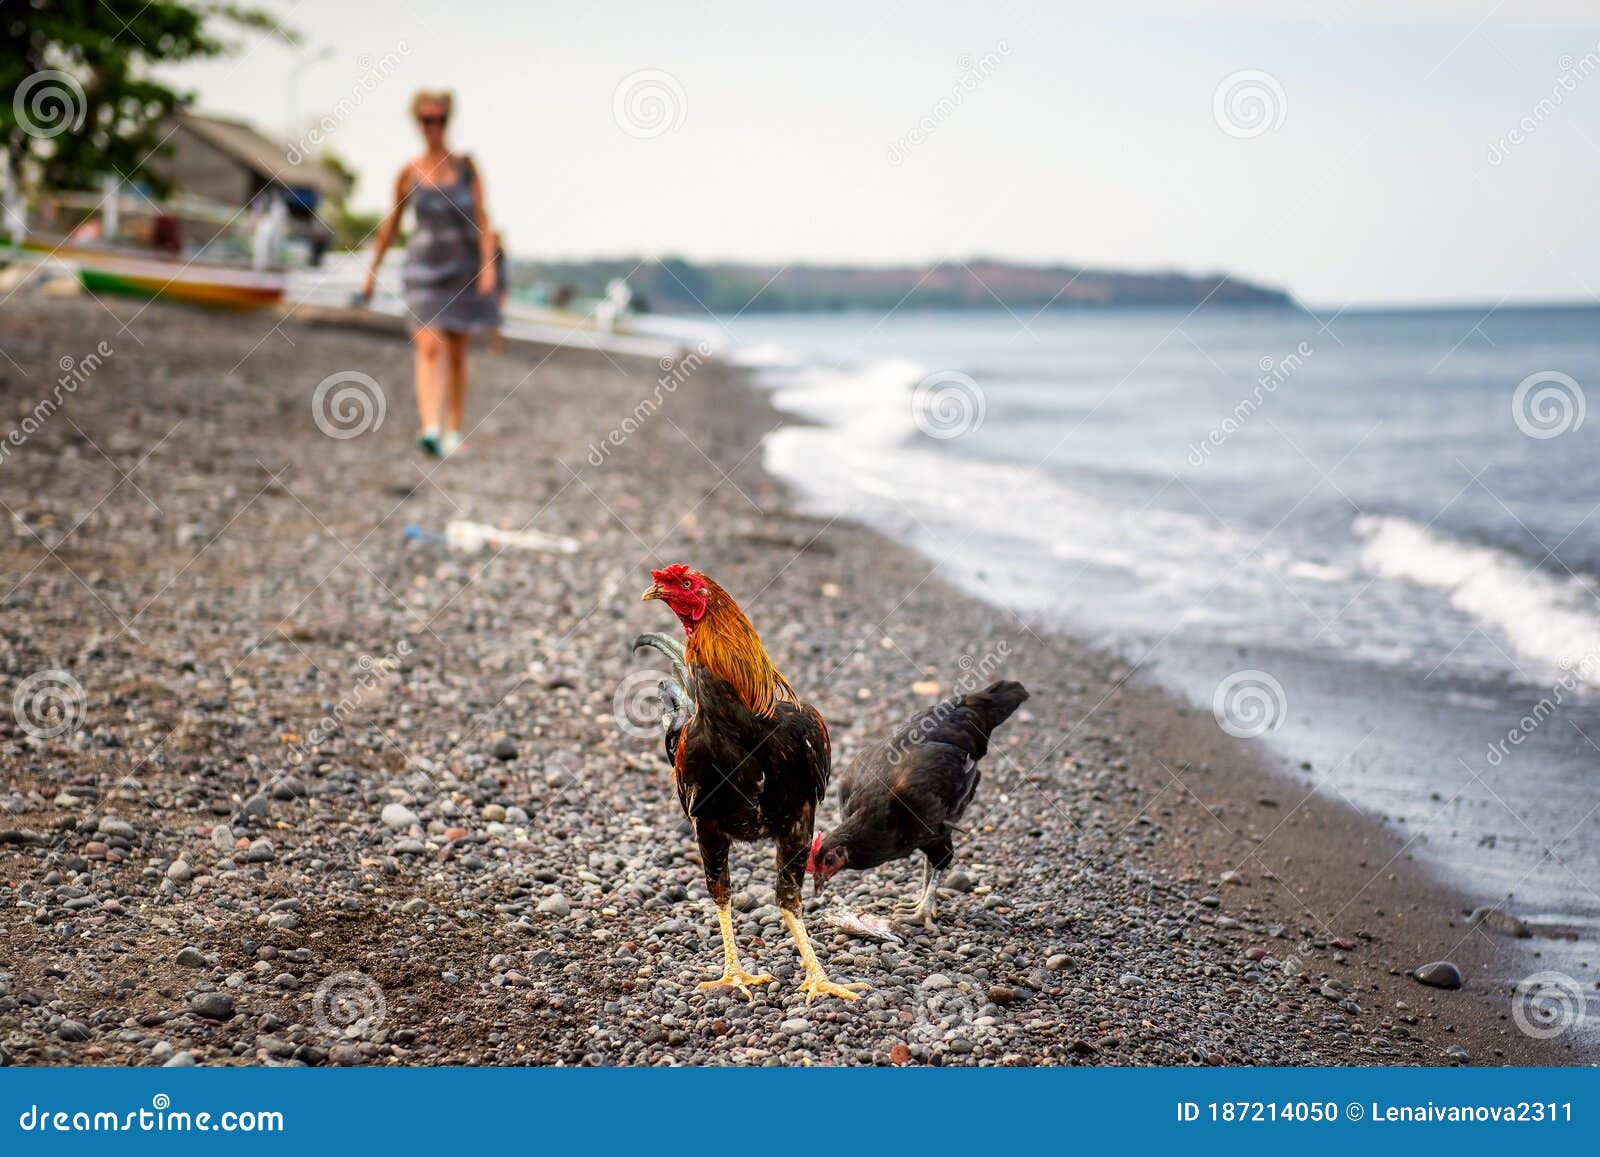 a cock on the beach in amed, bali, indonesia